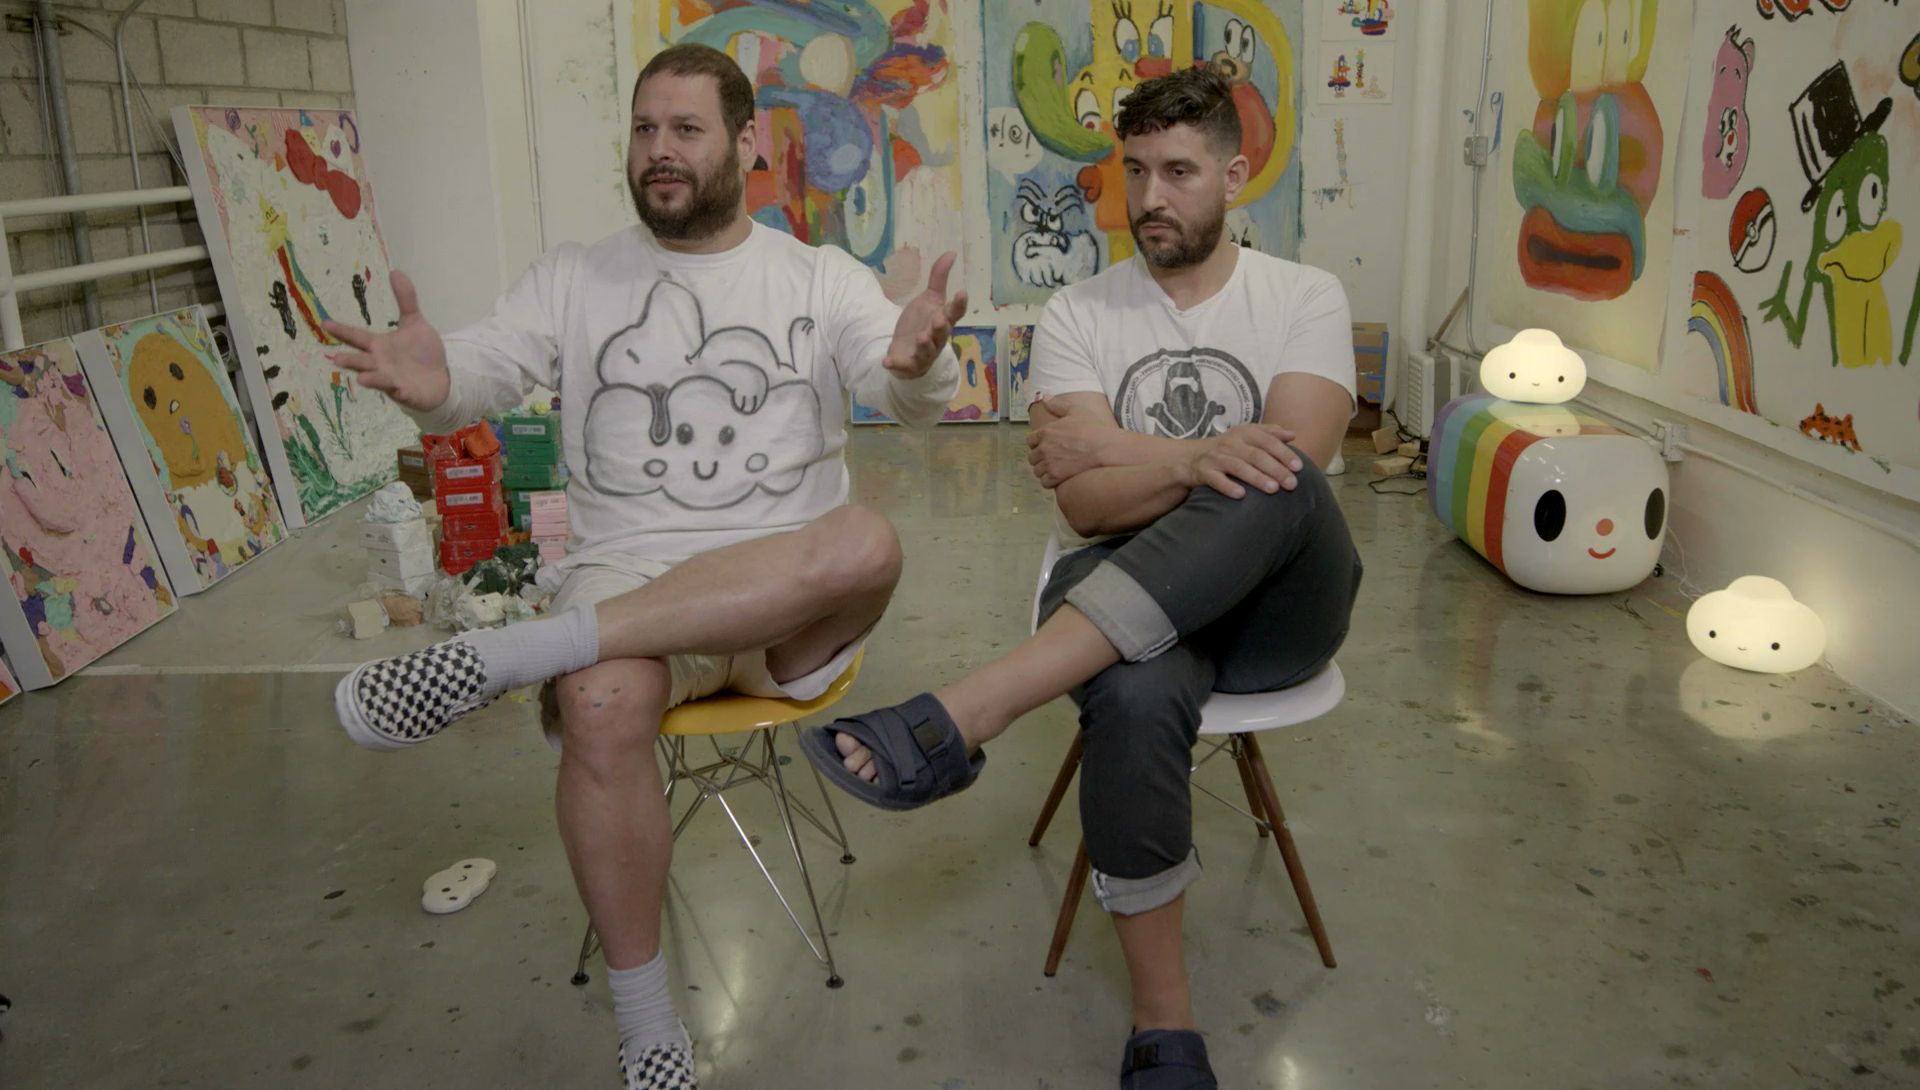 Two men sitting in chairs in an art studio having an interview. 